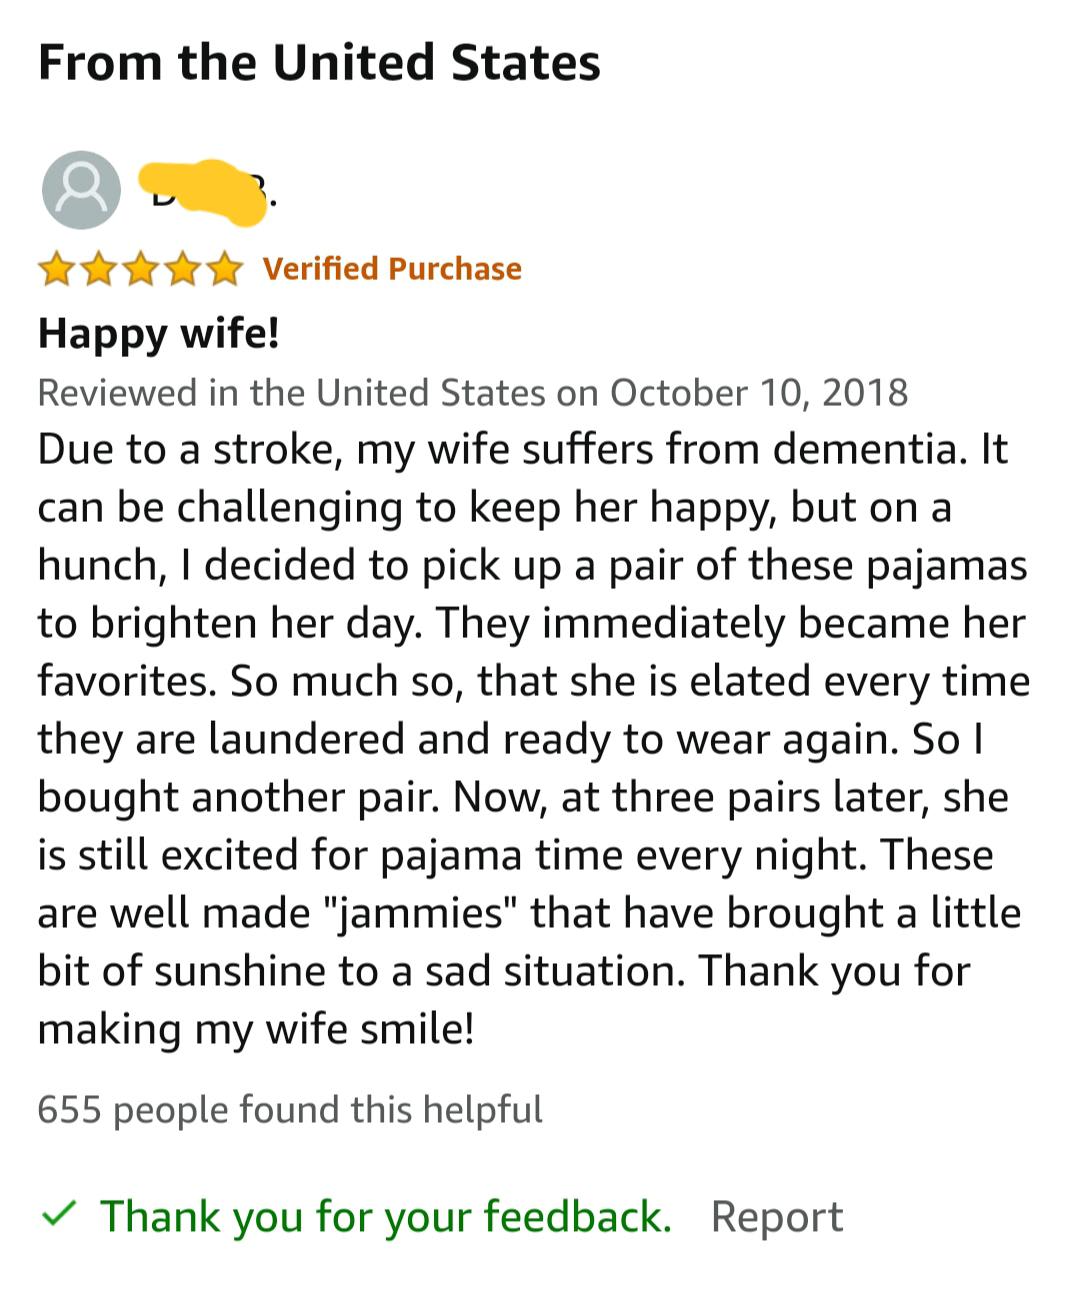 I was shopping for PJs when I found this beautiful review. Made me smile, and tear up. I hope she is still enjoying those jammies!